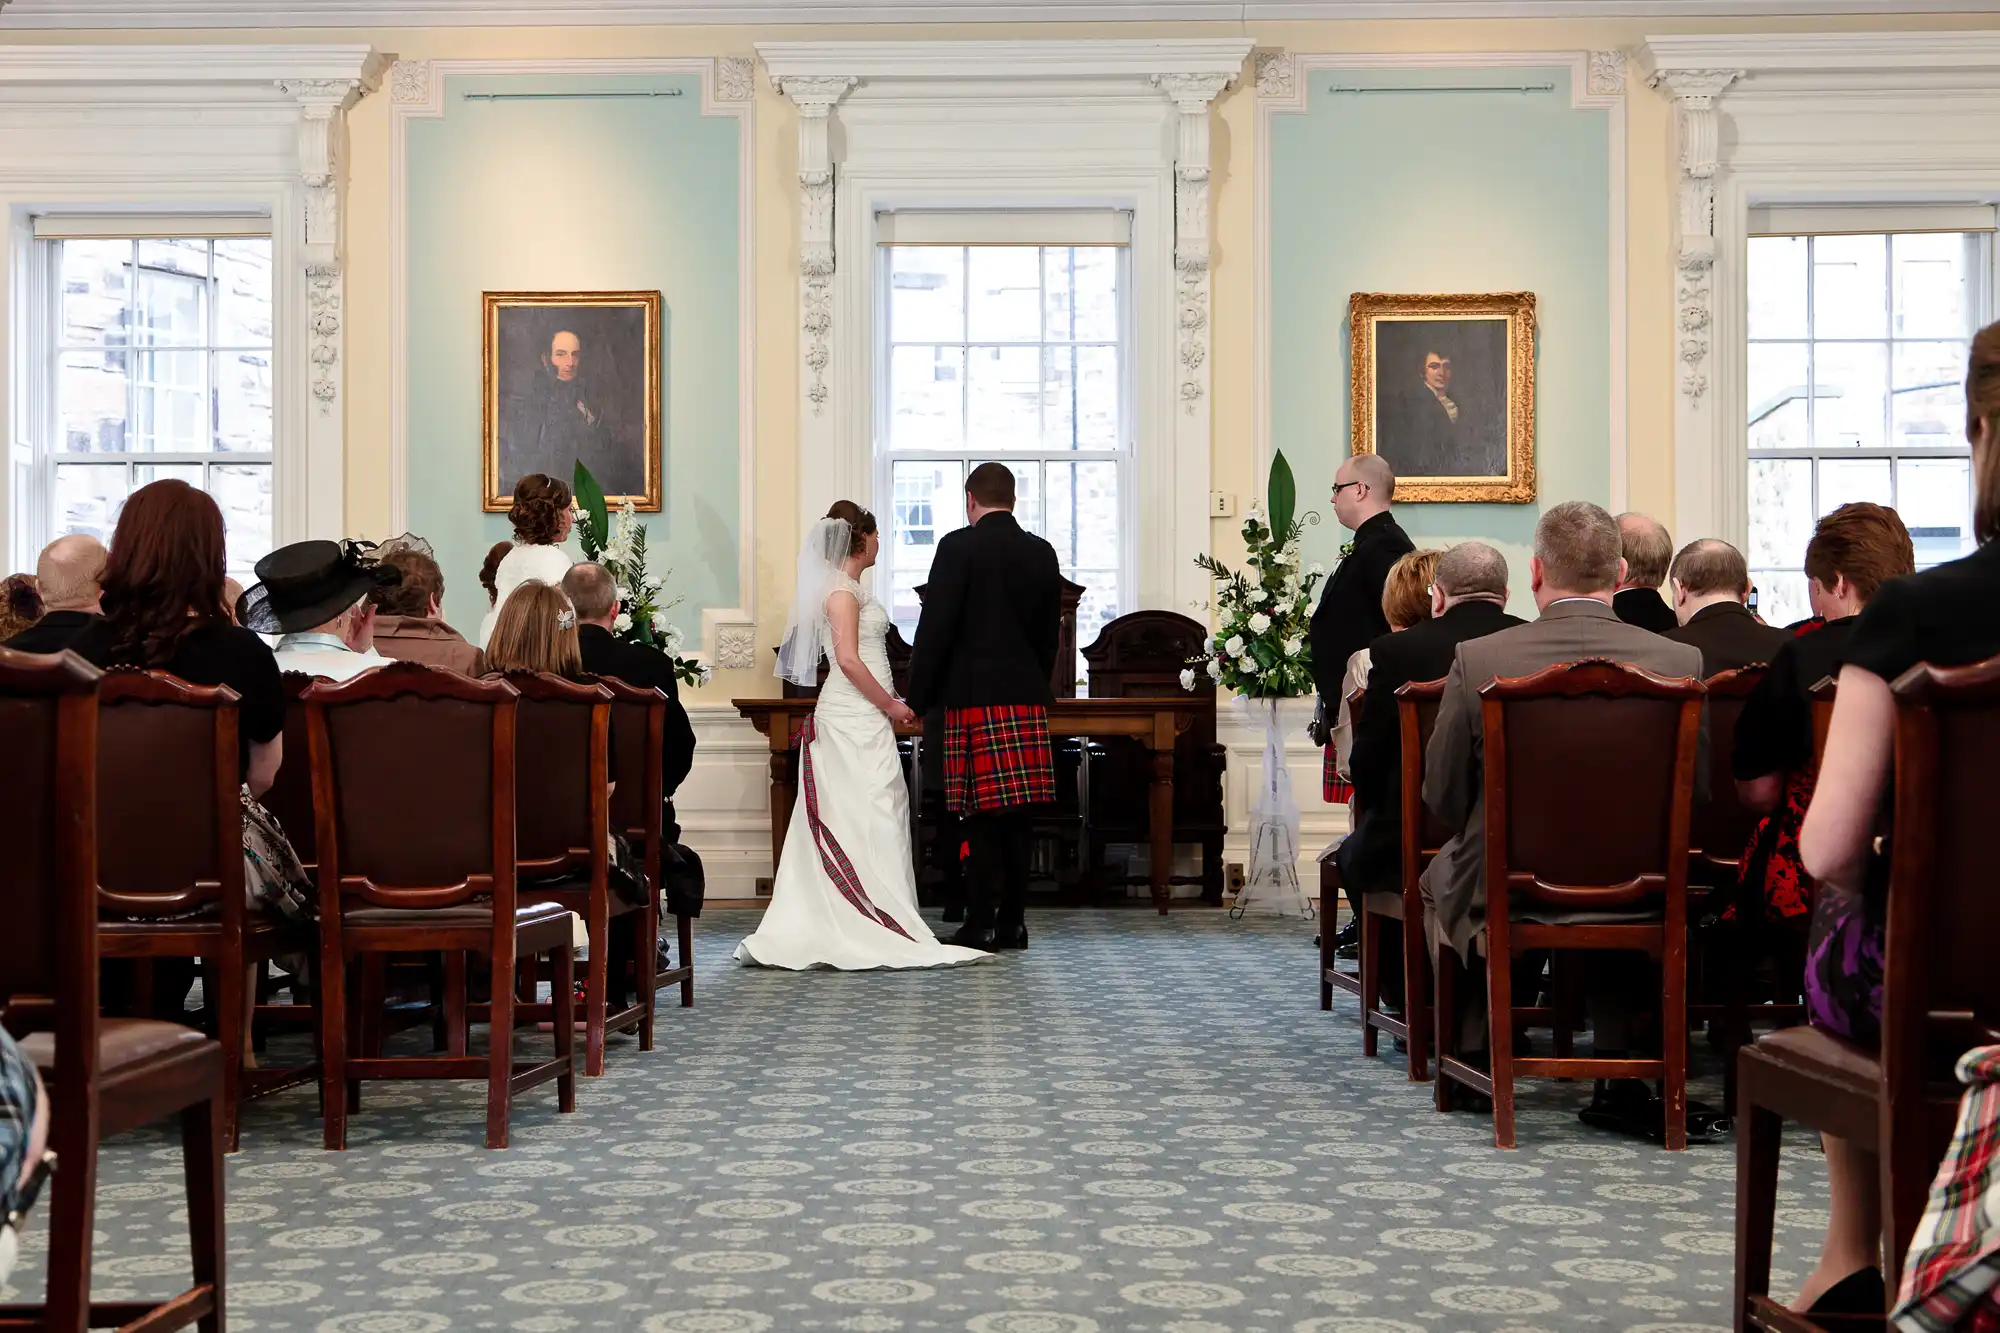 A wedding ceremony in an elegant room with guests seated, the bride and groom standing at the altar, and portraits on the walls.